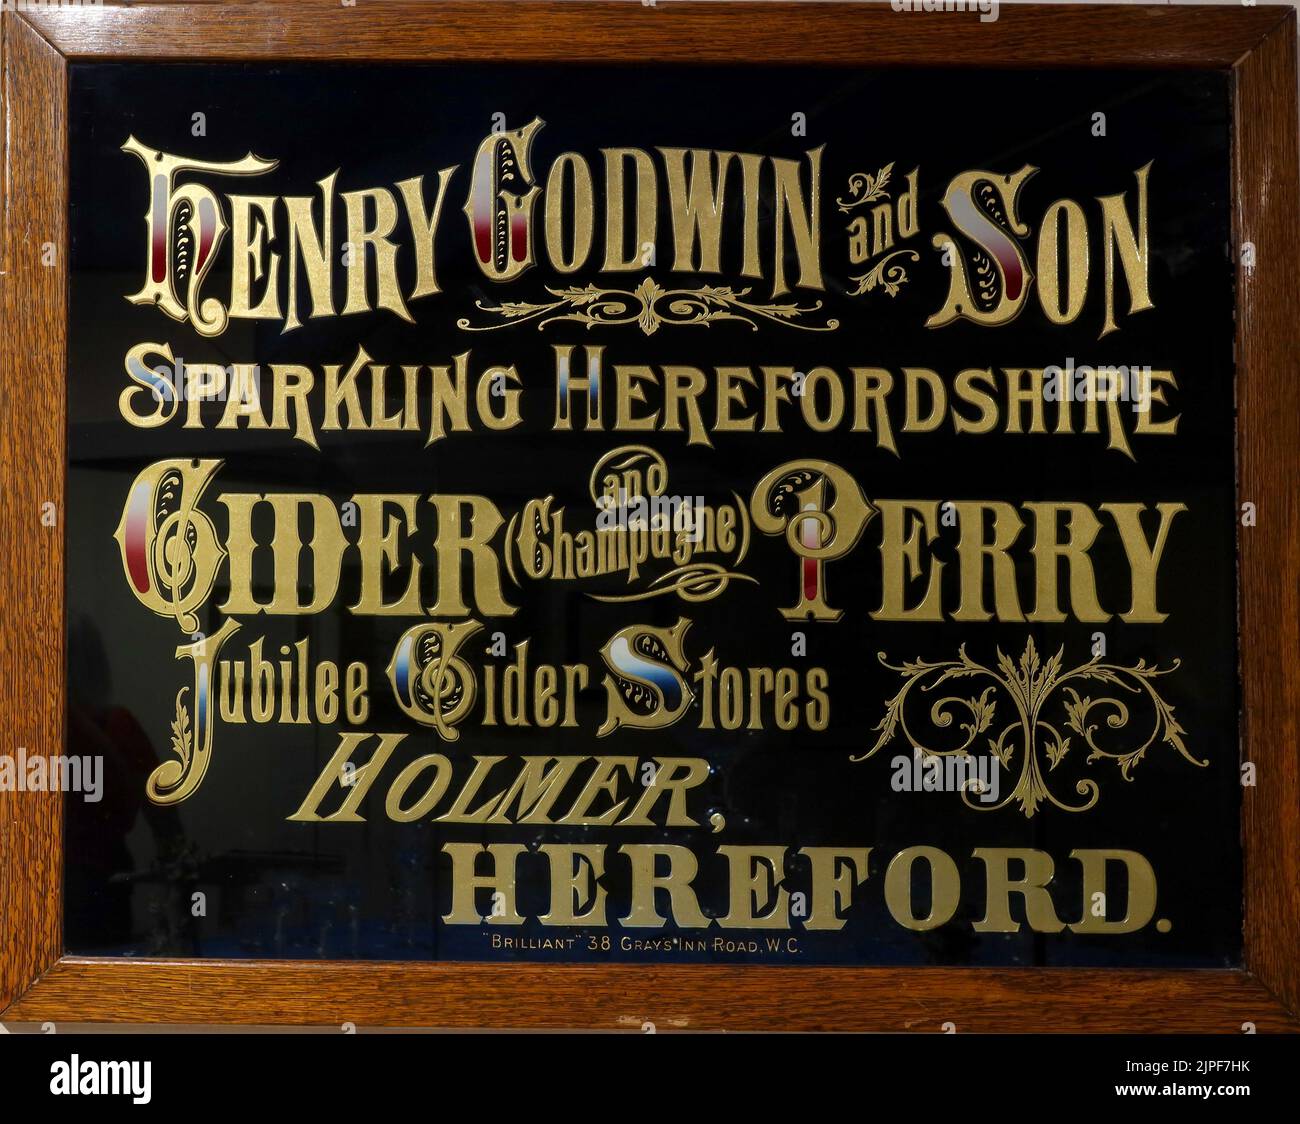 Black framed advert, Henry Godwin and son, sparkling Herefordshire, Cider Champagne Perry, Jubilee Cider Stores, Holmer, Hereford, HR1 1LL Stock Photo